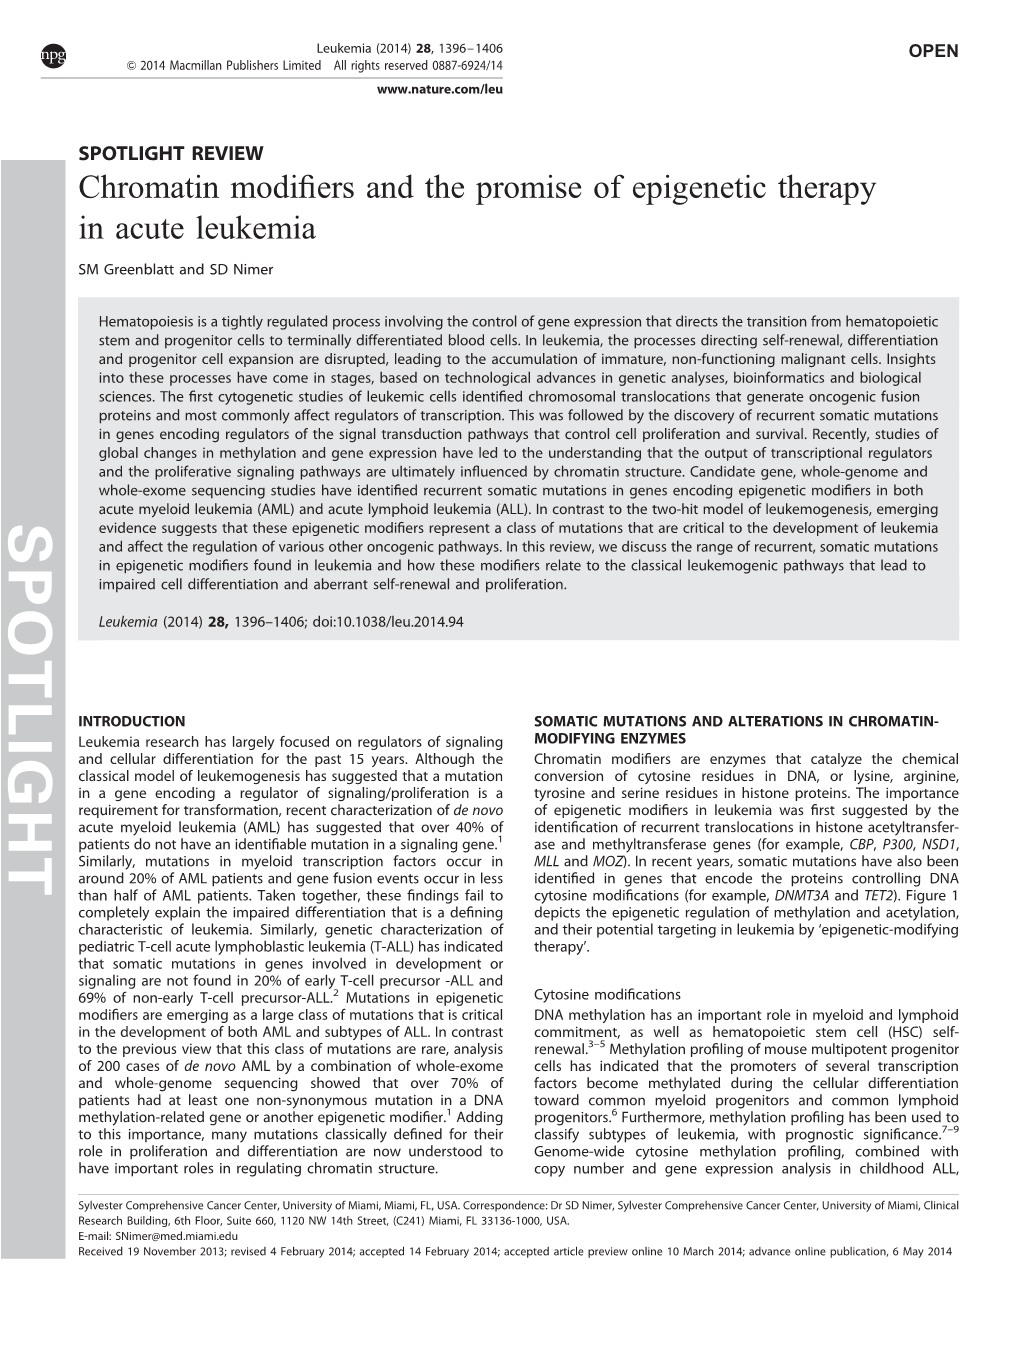 Chromatin Modifiers and the Promise of Epigenetic Therapy in Acute